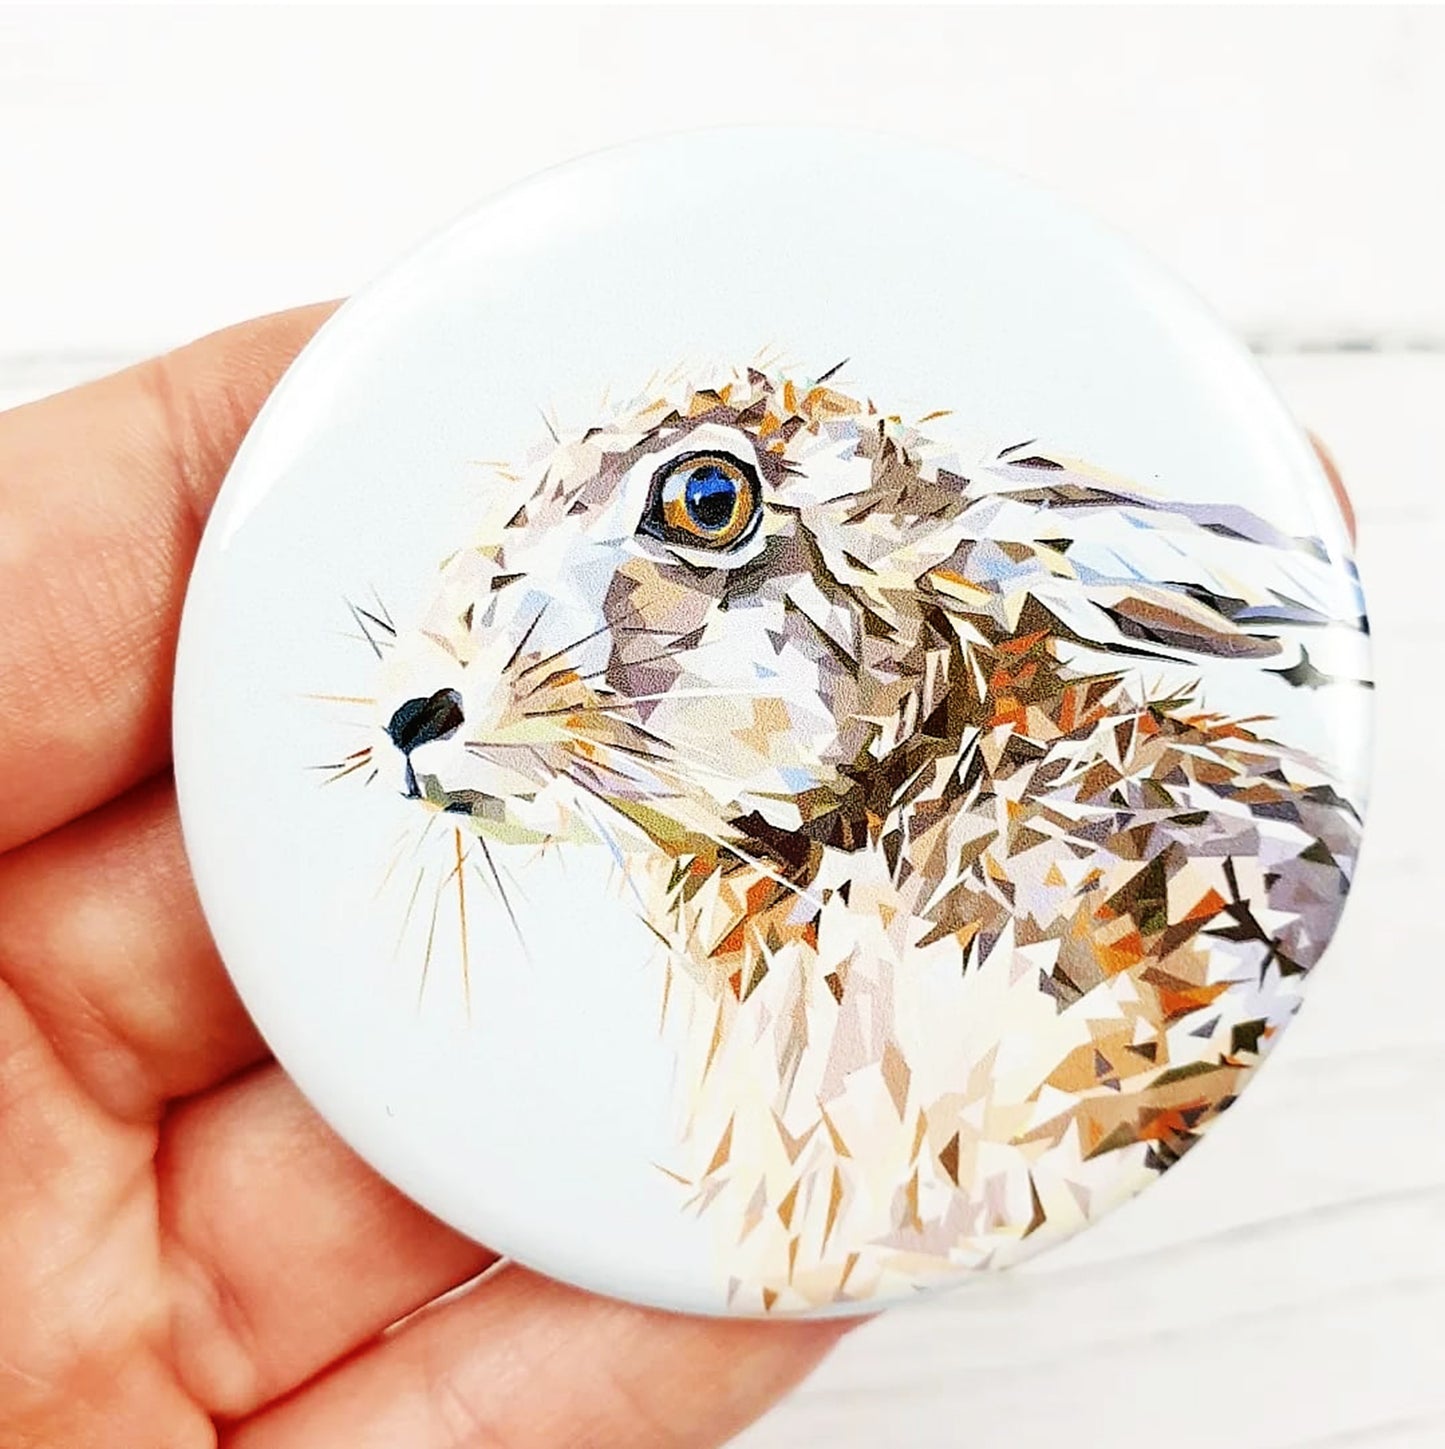 MOUNTAIN HARE magnet